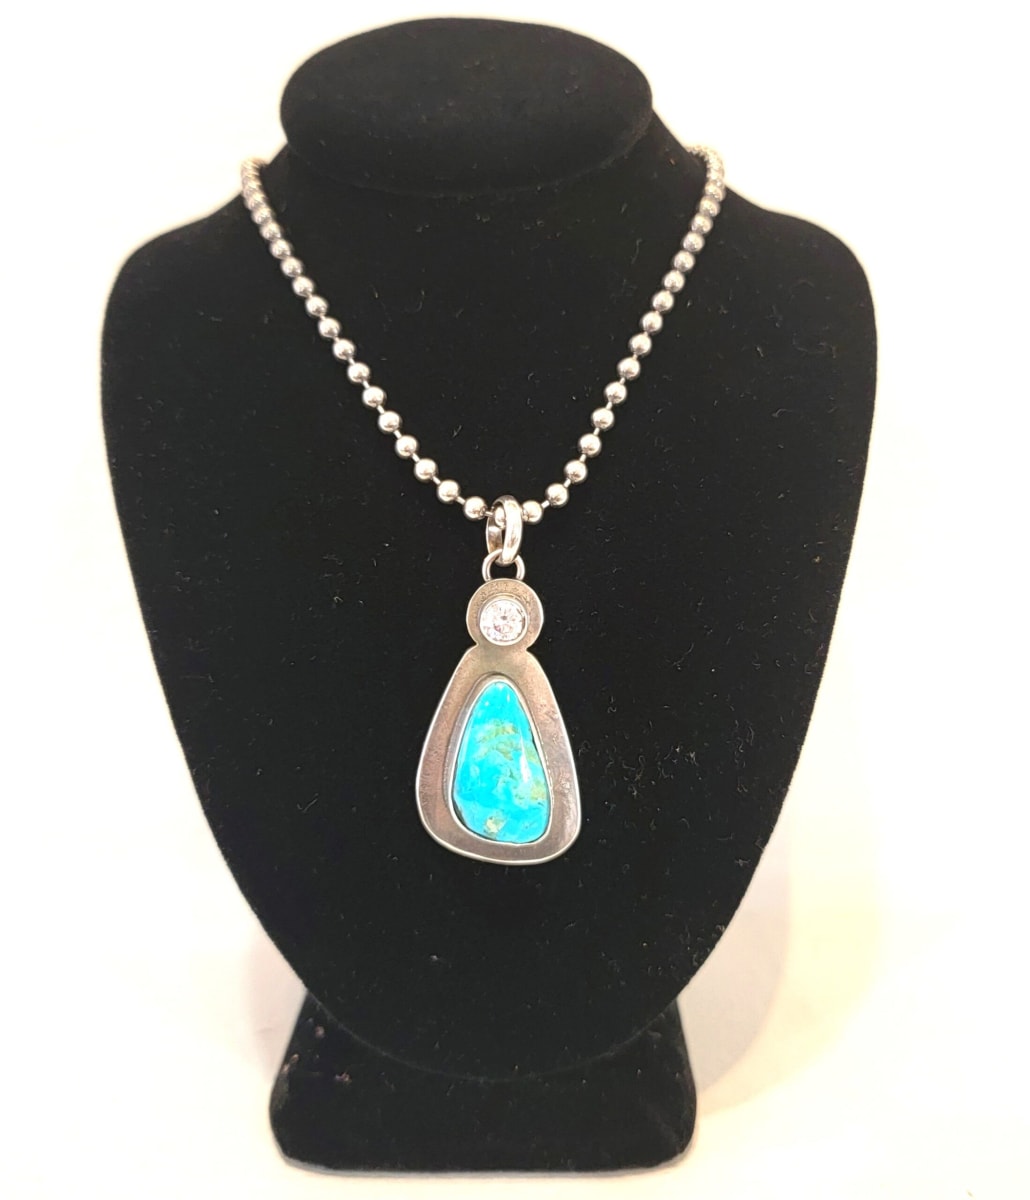 "Water Spell Necklace" - Minimalist Vintage Blue Turquoise and Cubic Zirconia Pendant on Bead Ball Chain by Shasta Brooks  Image: All Art © Shasta Brooks Studio LLC